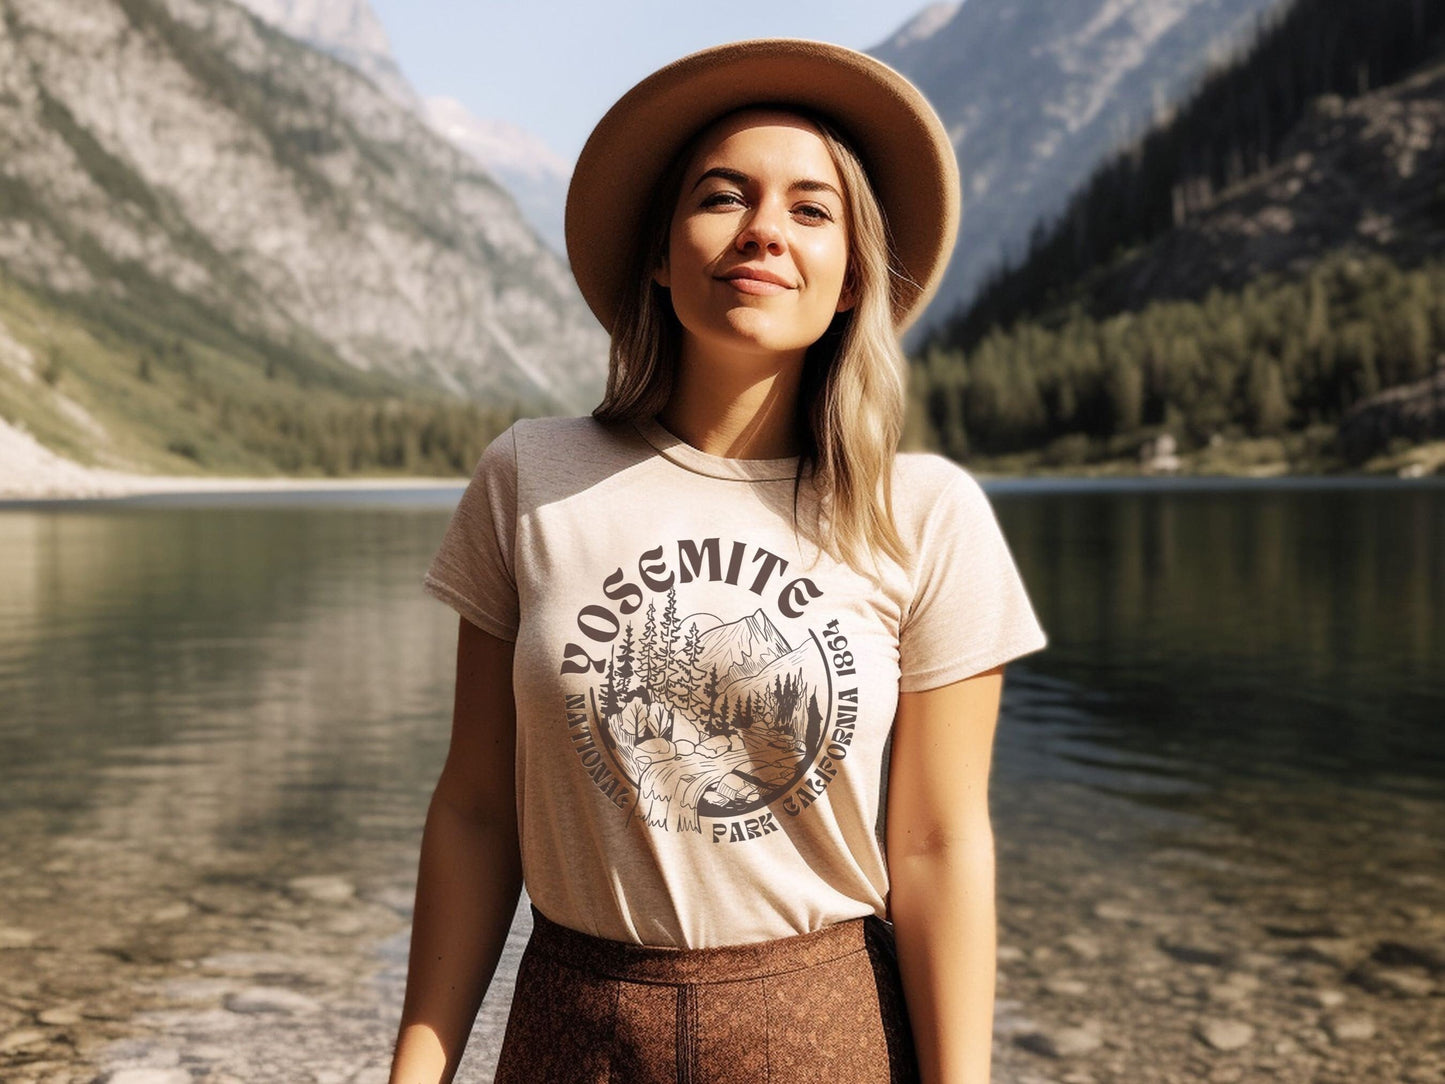 Yosemite National Park ShirtBring the wilderness of Yosemite National Park and California style into your wardrobe with this vintage styled boyfriend t-shirt inspired by the natural beauty of t